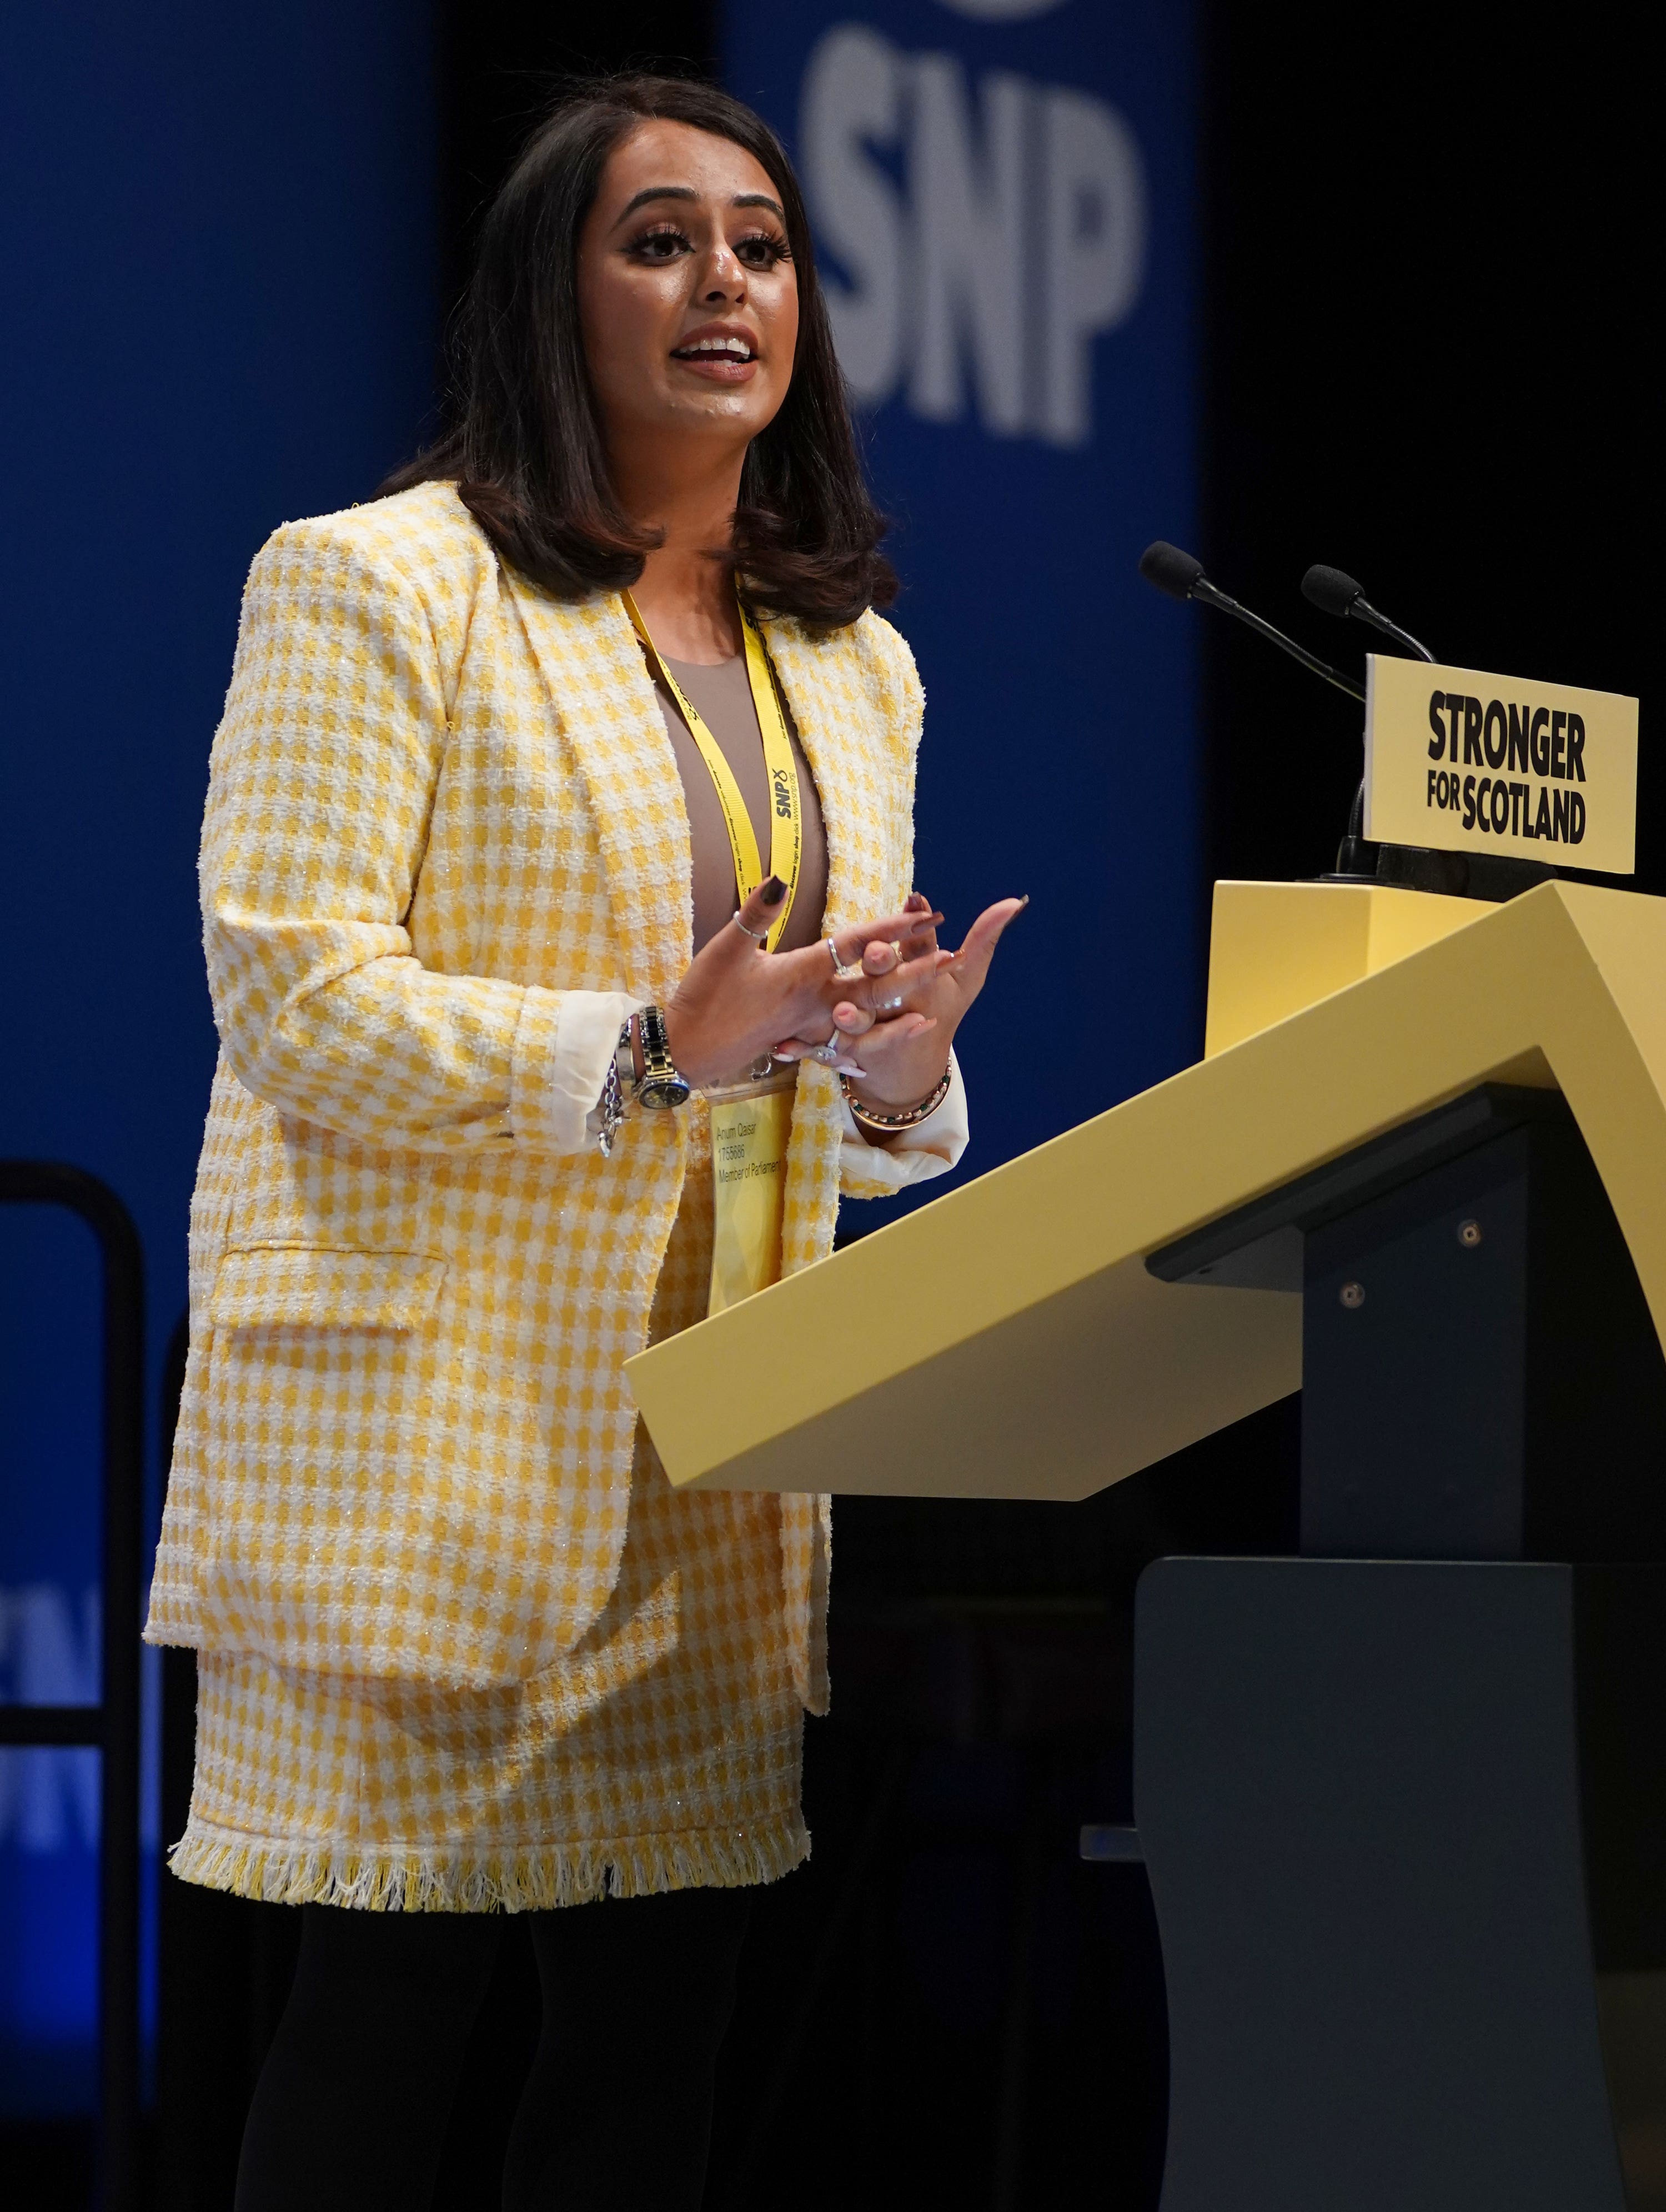 SNP MP Anum Qaisar said the figures showed the party was ‘helping to keep money in people’s pockets'.